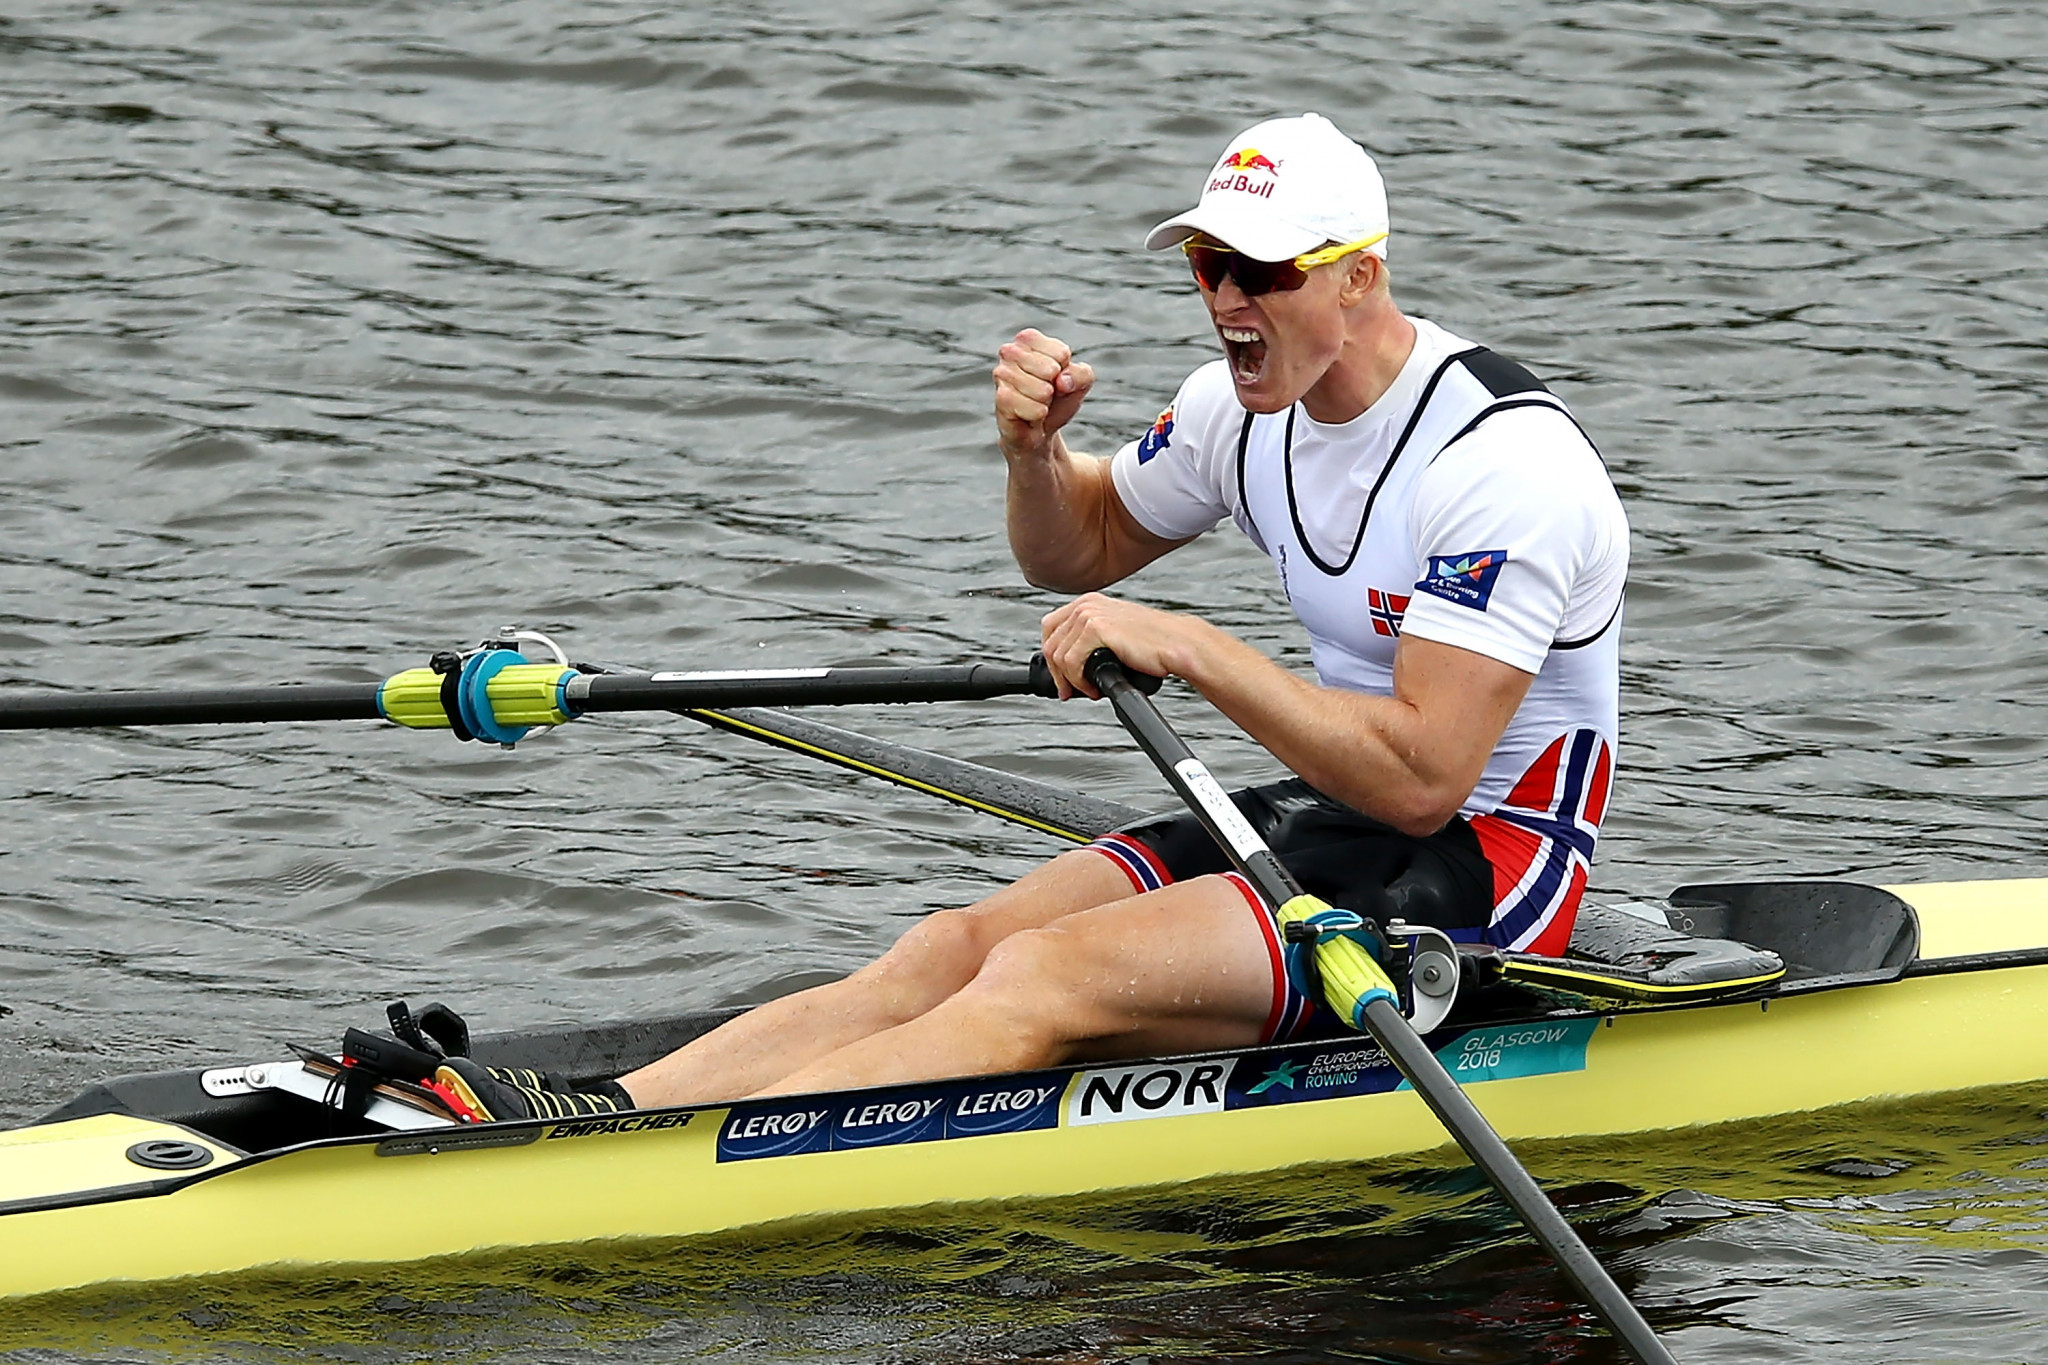 Norway's world and European single sculls champion Kjetil Borch will compete at the European Rowing Championships in Lucerne, where he will be among the favourites ©Getty Images